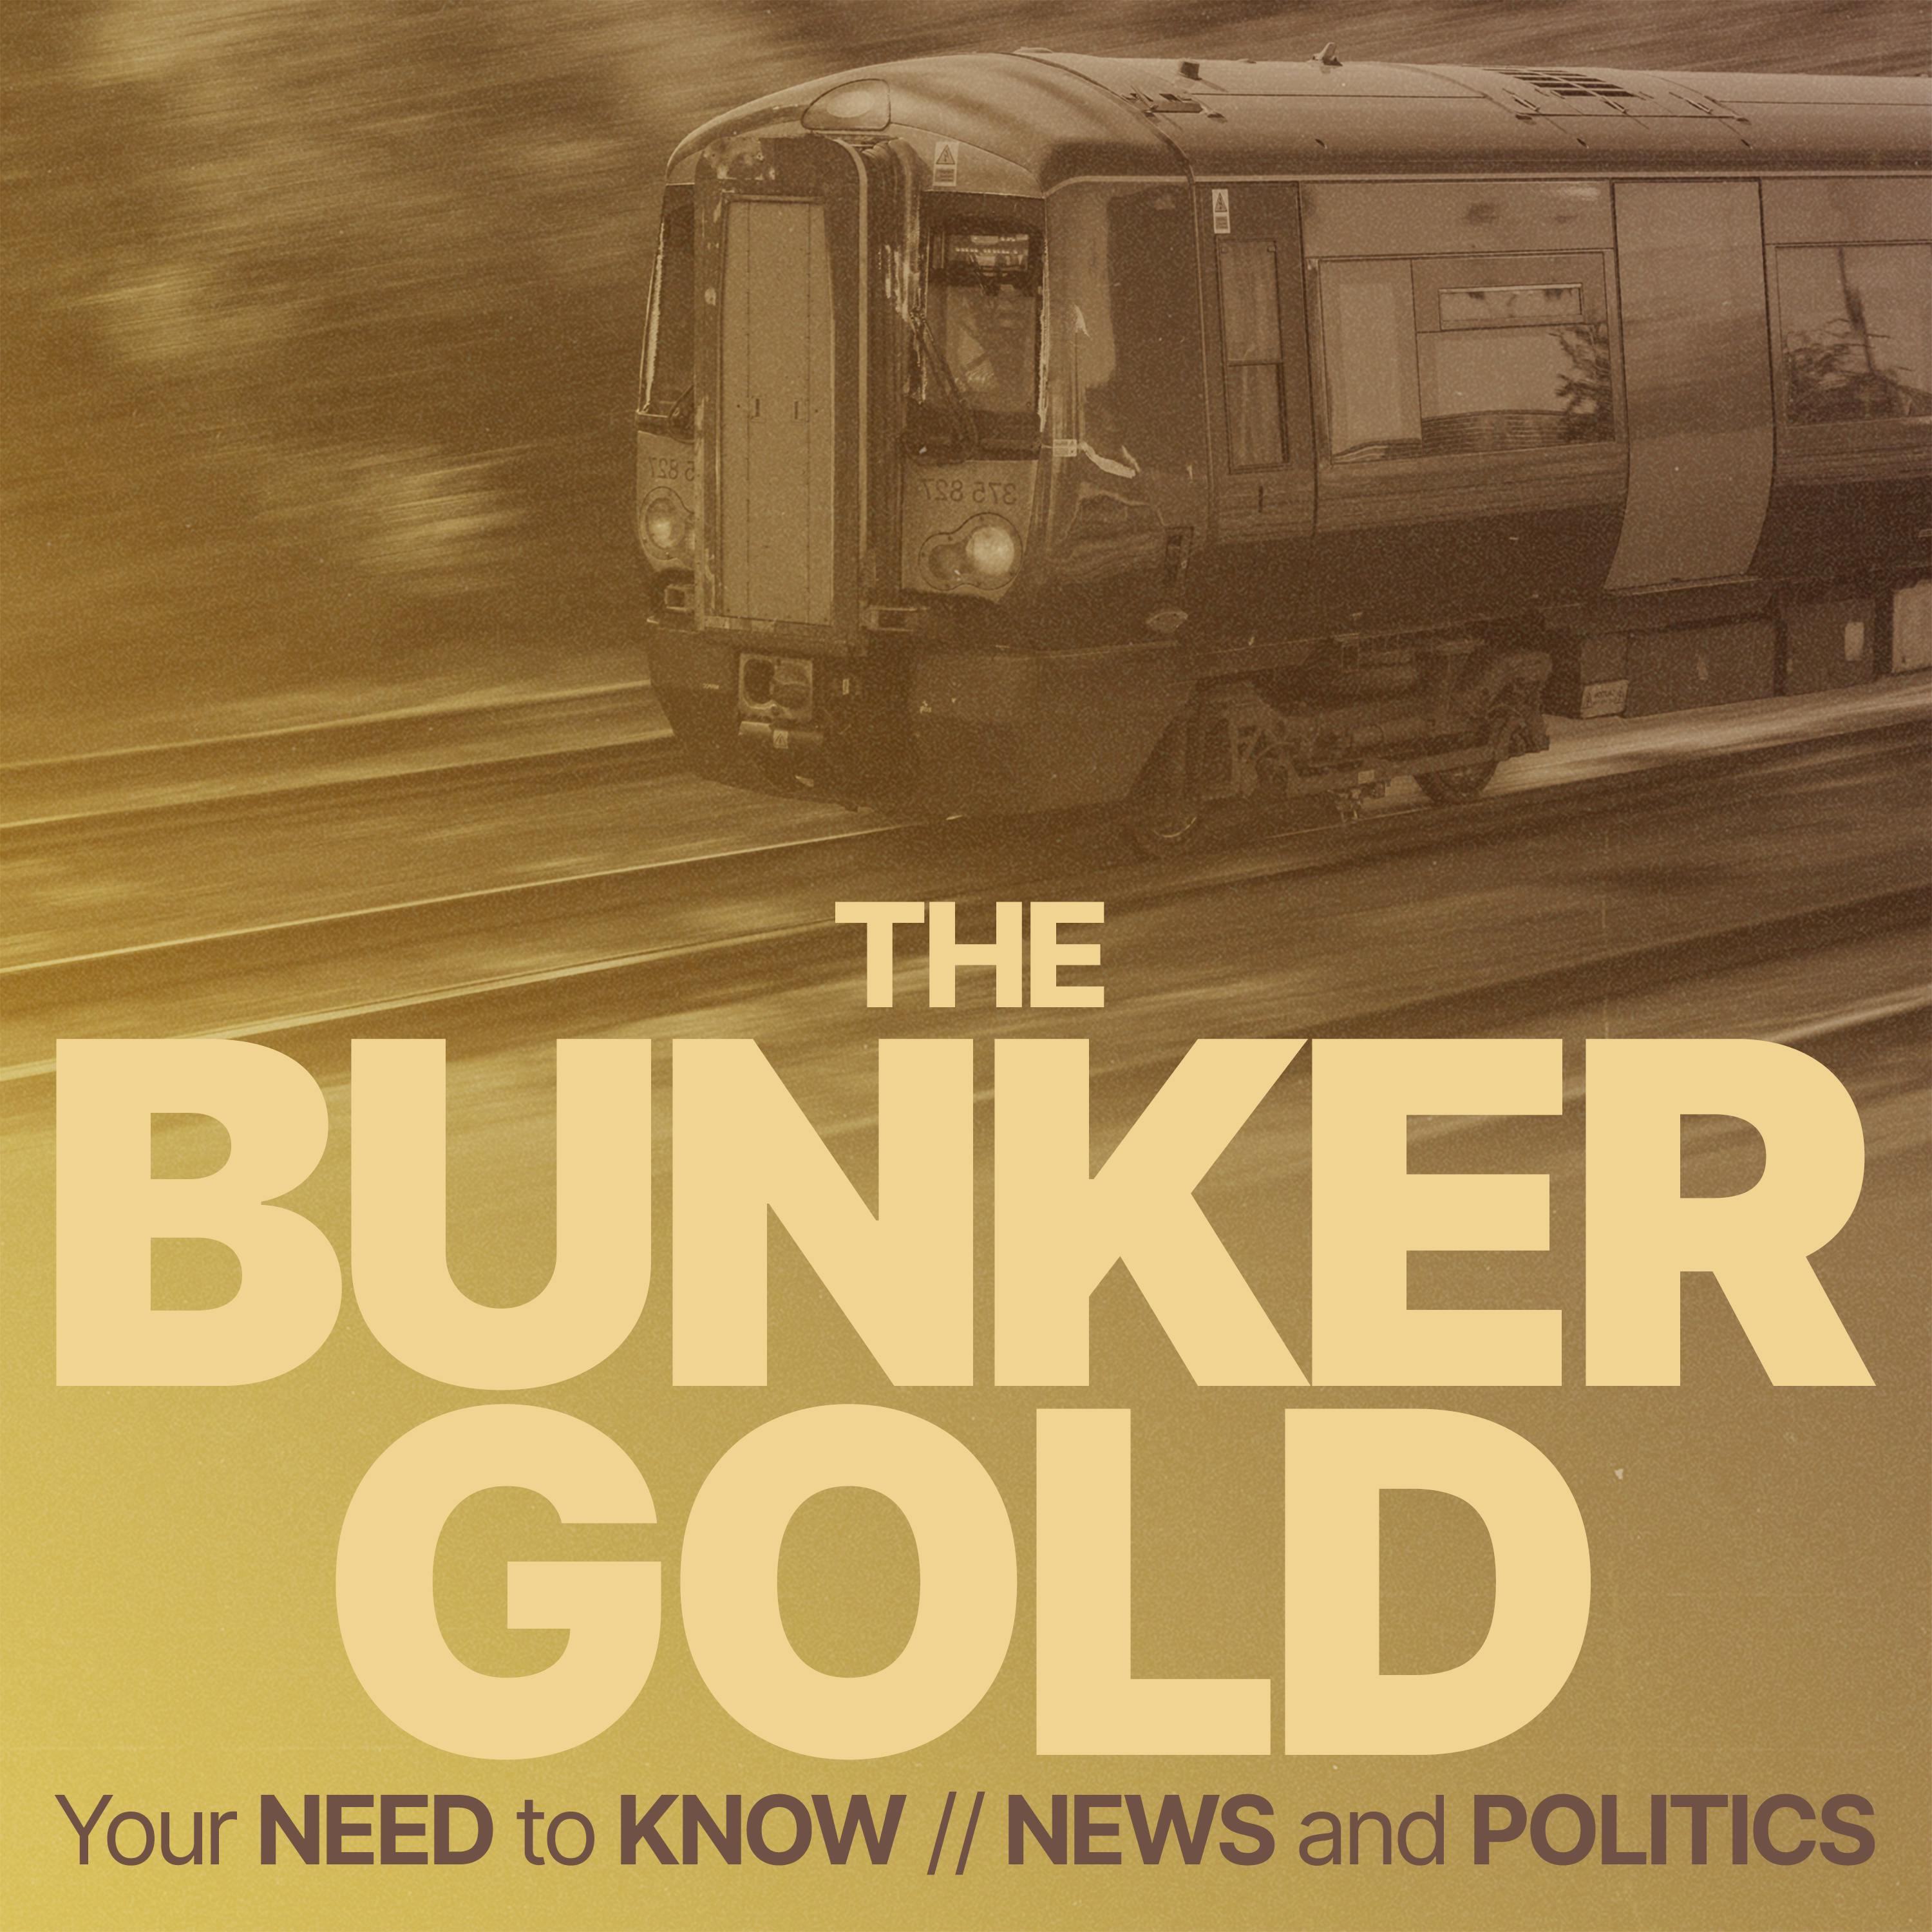 BUNKER GOLD - British Fail: How To Fix Our Broken Rail System